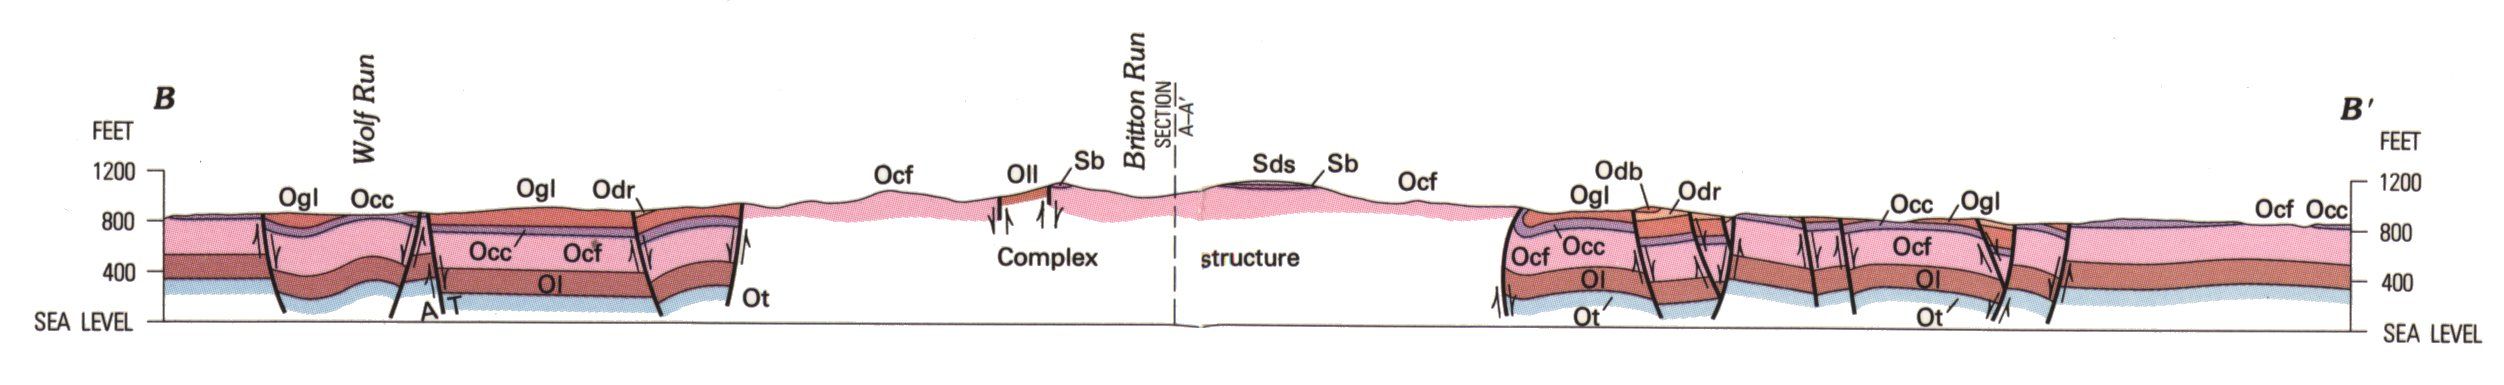 The cross section across the Jeptha Knob astrobleme is a representation of what the rocks beneath the surface of Jeptha Knob look like